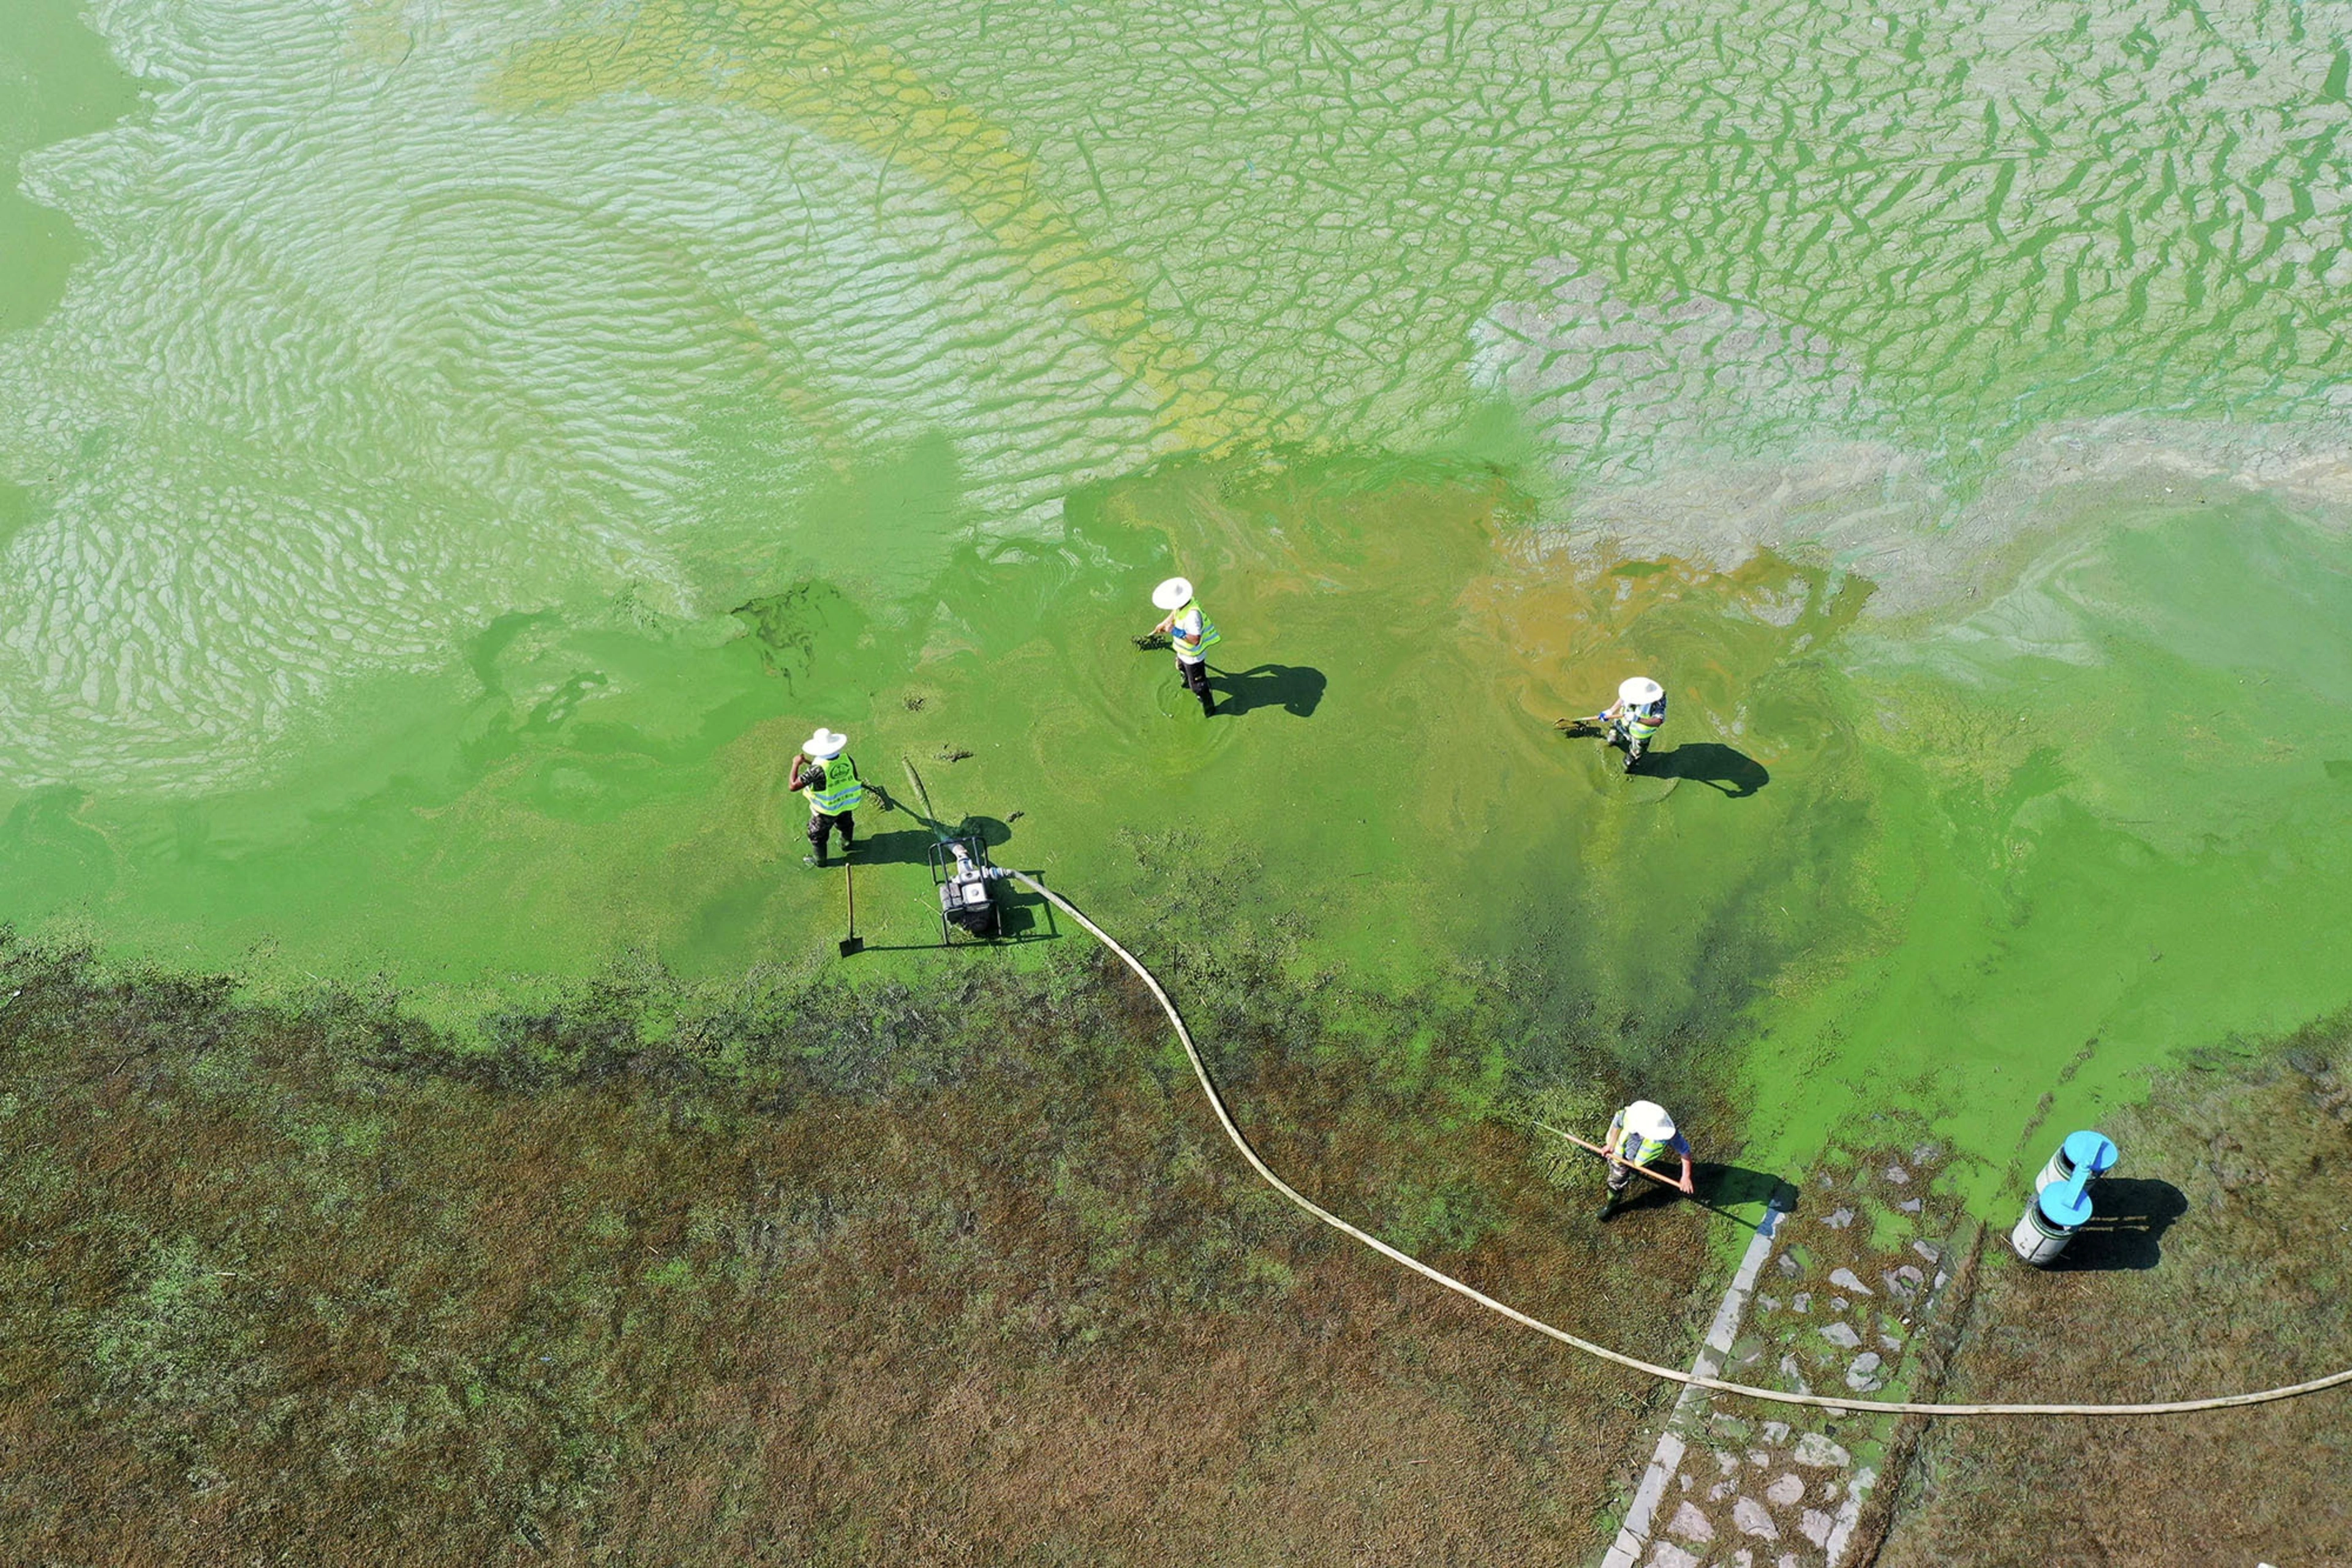 Workers try to clear algae from a polluted lake in Anhui Province.